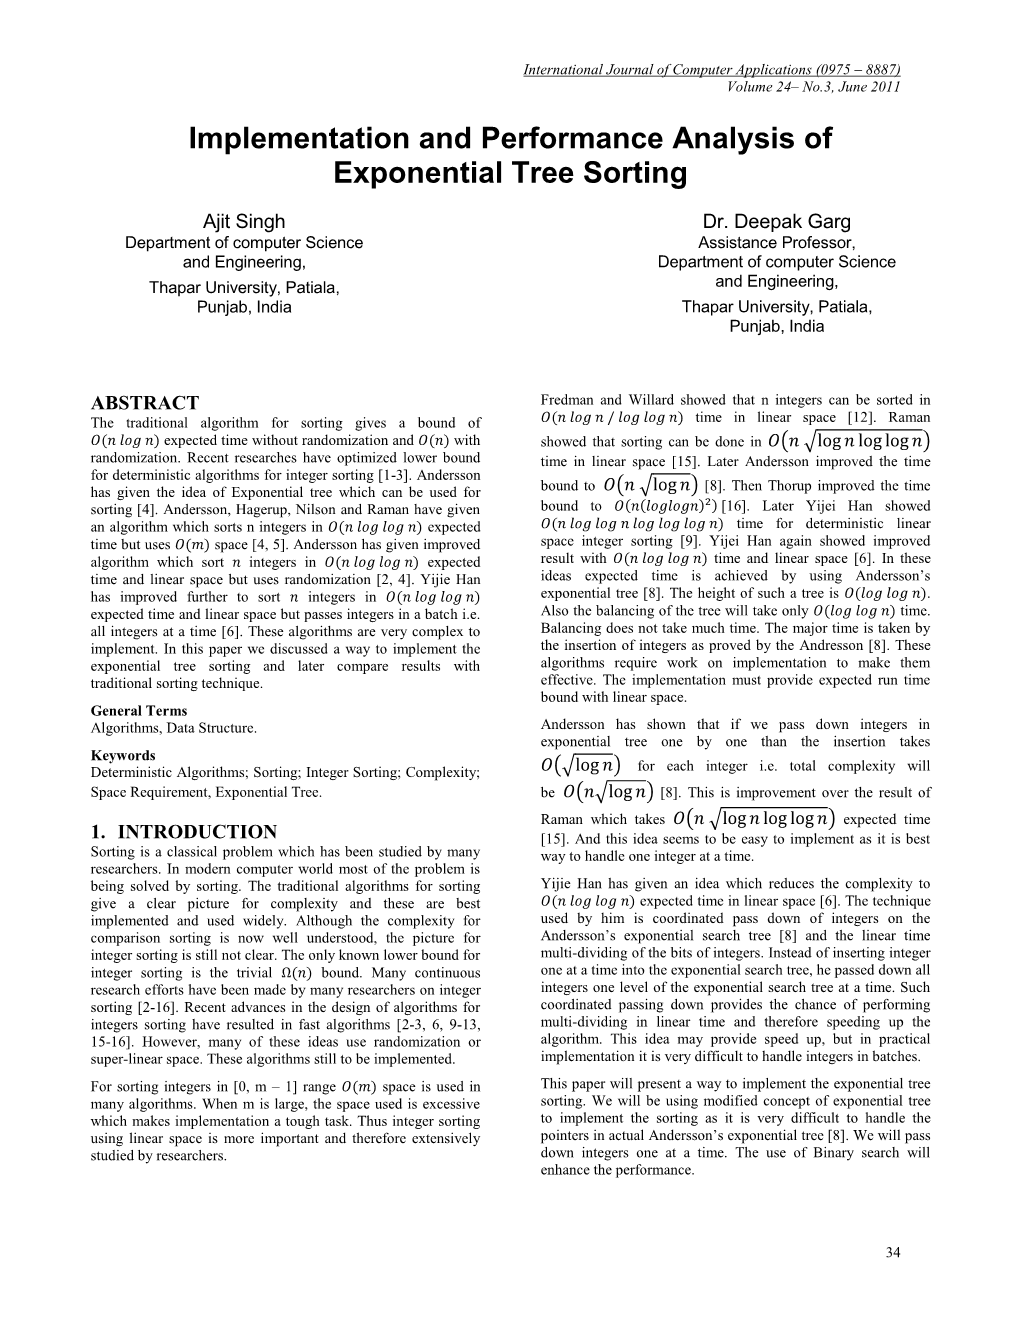 Implementation and Performance Analysis of Exponential Tree Sorting